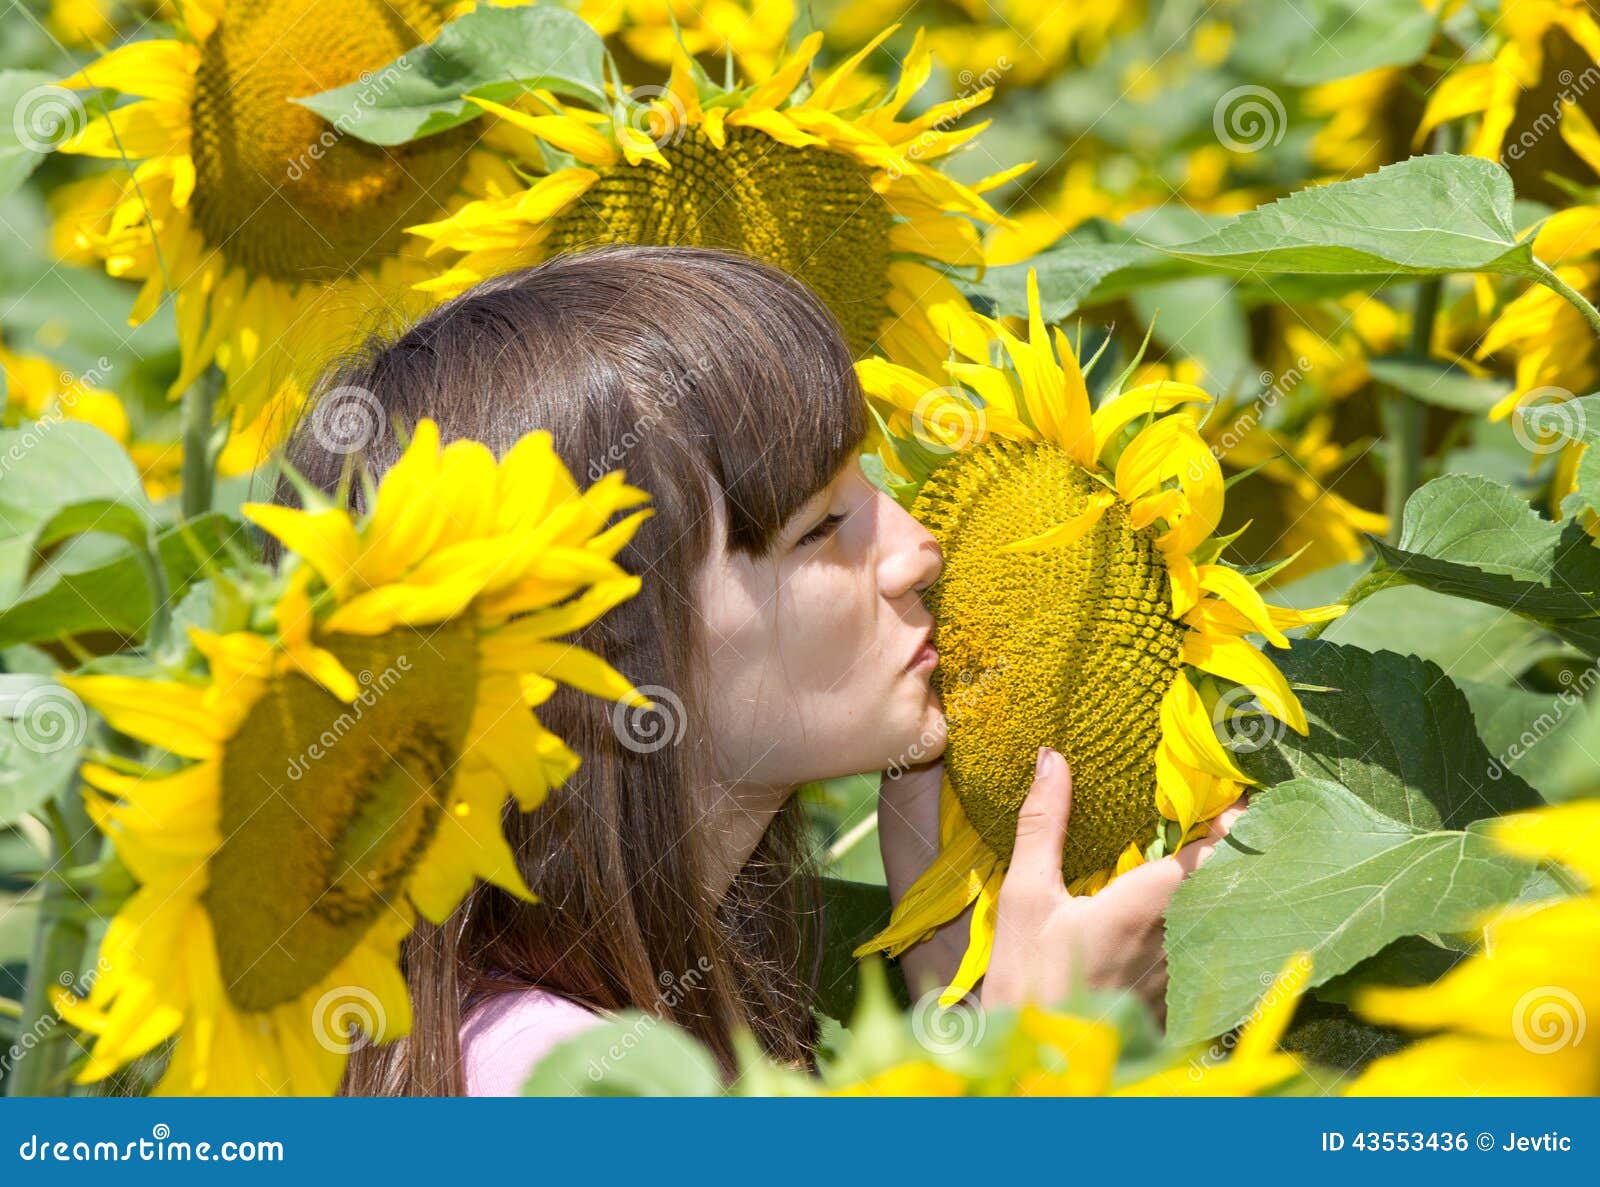 Summer kiss stock photo. Image of field, bright, nature - 43553436